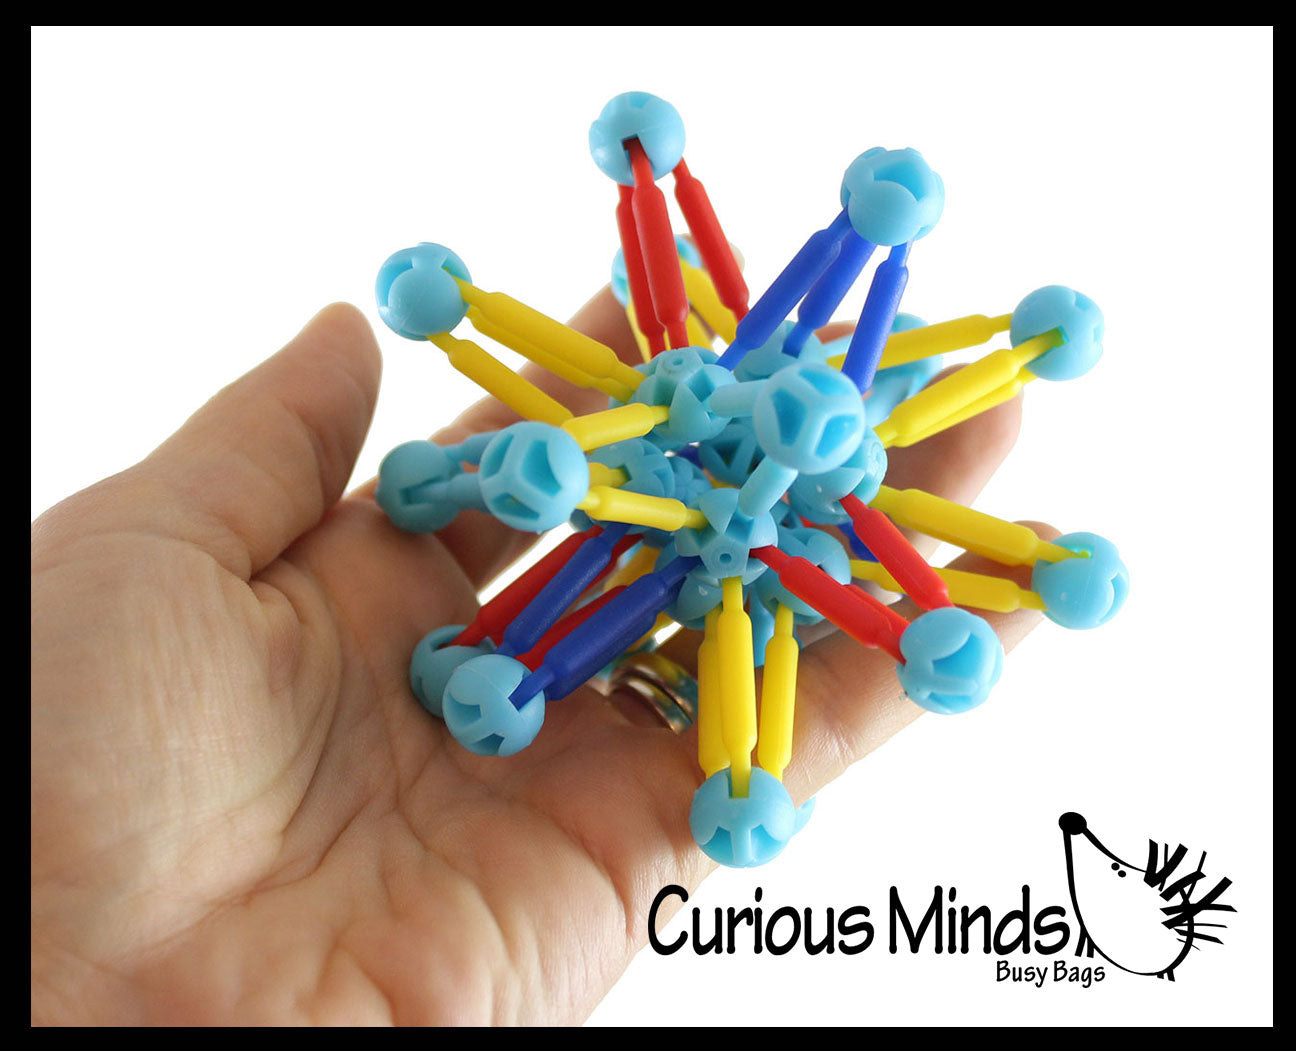 Mini Collapsible Ball - Expanding and Contracting Ball - Grow and Shrink Fidget Ball - Anxiety Breathing Exercises